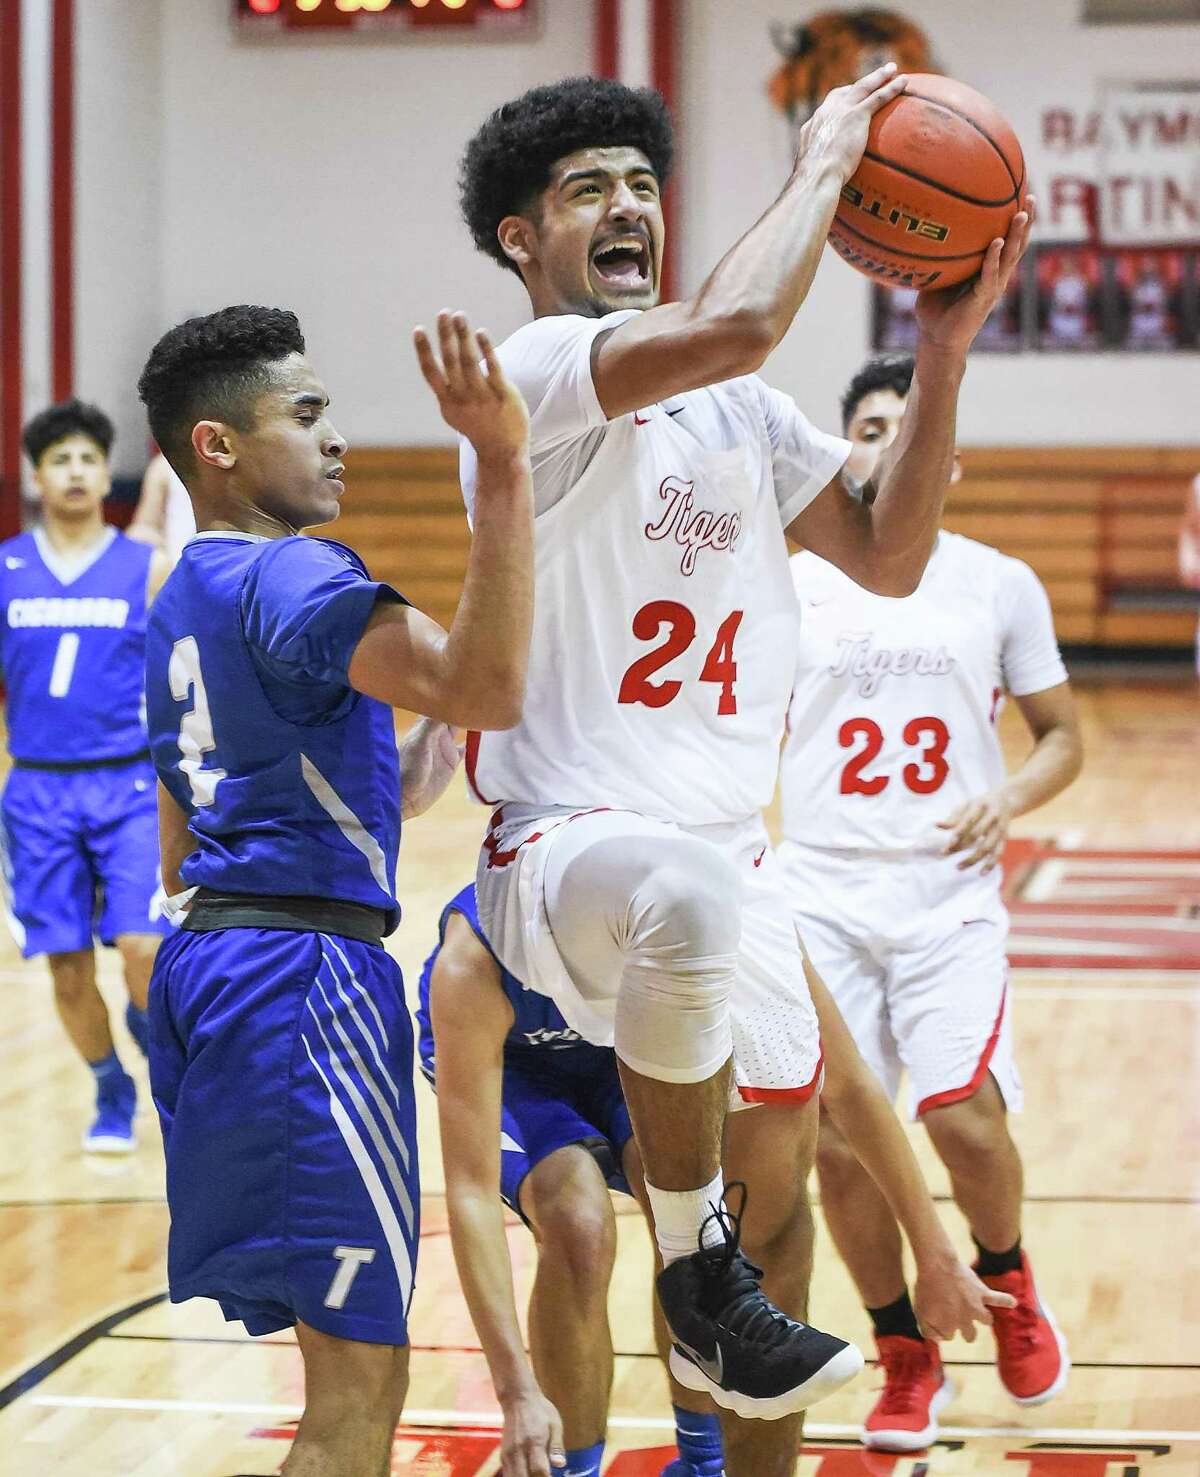 Mathew Duron had 27 points, 12 rebounds and seven assists as the Tigers got some revenge over Cigarroa for a previous loss winning 89-68 Tuesday.